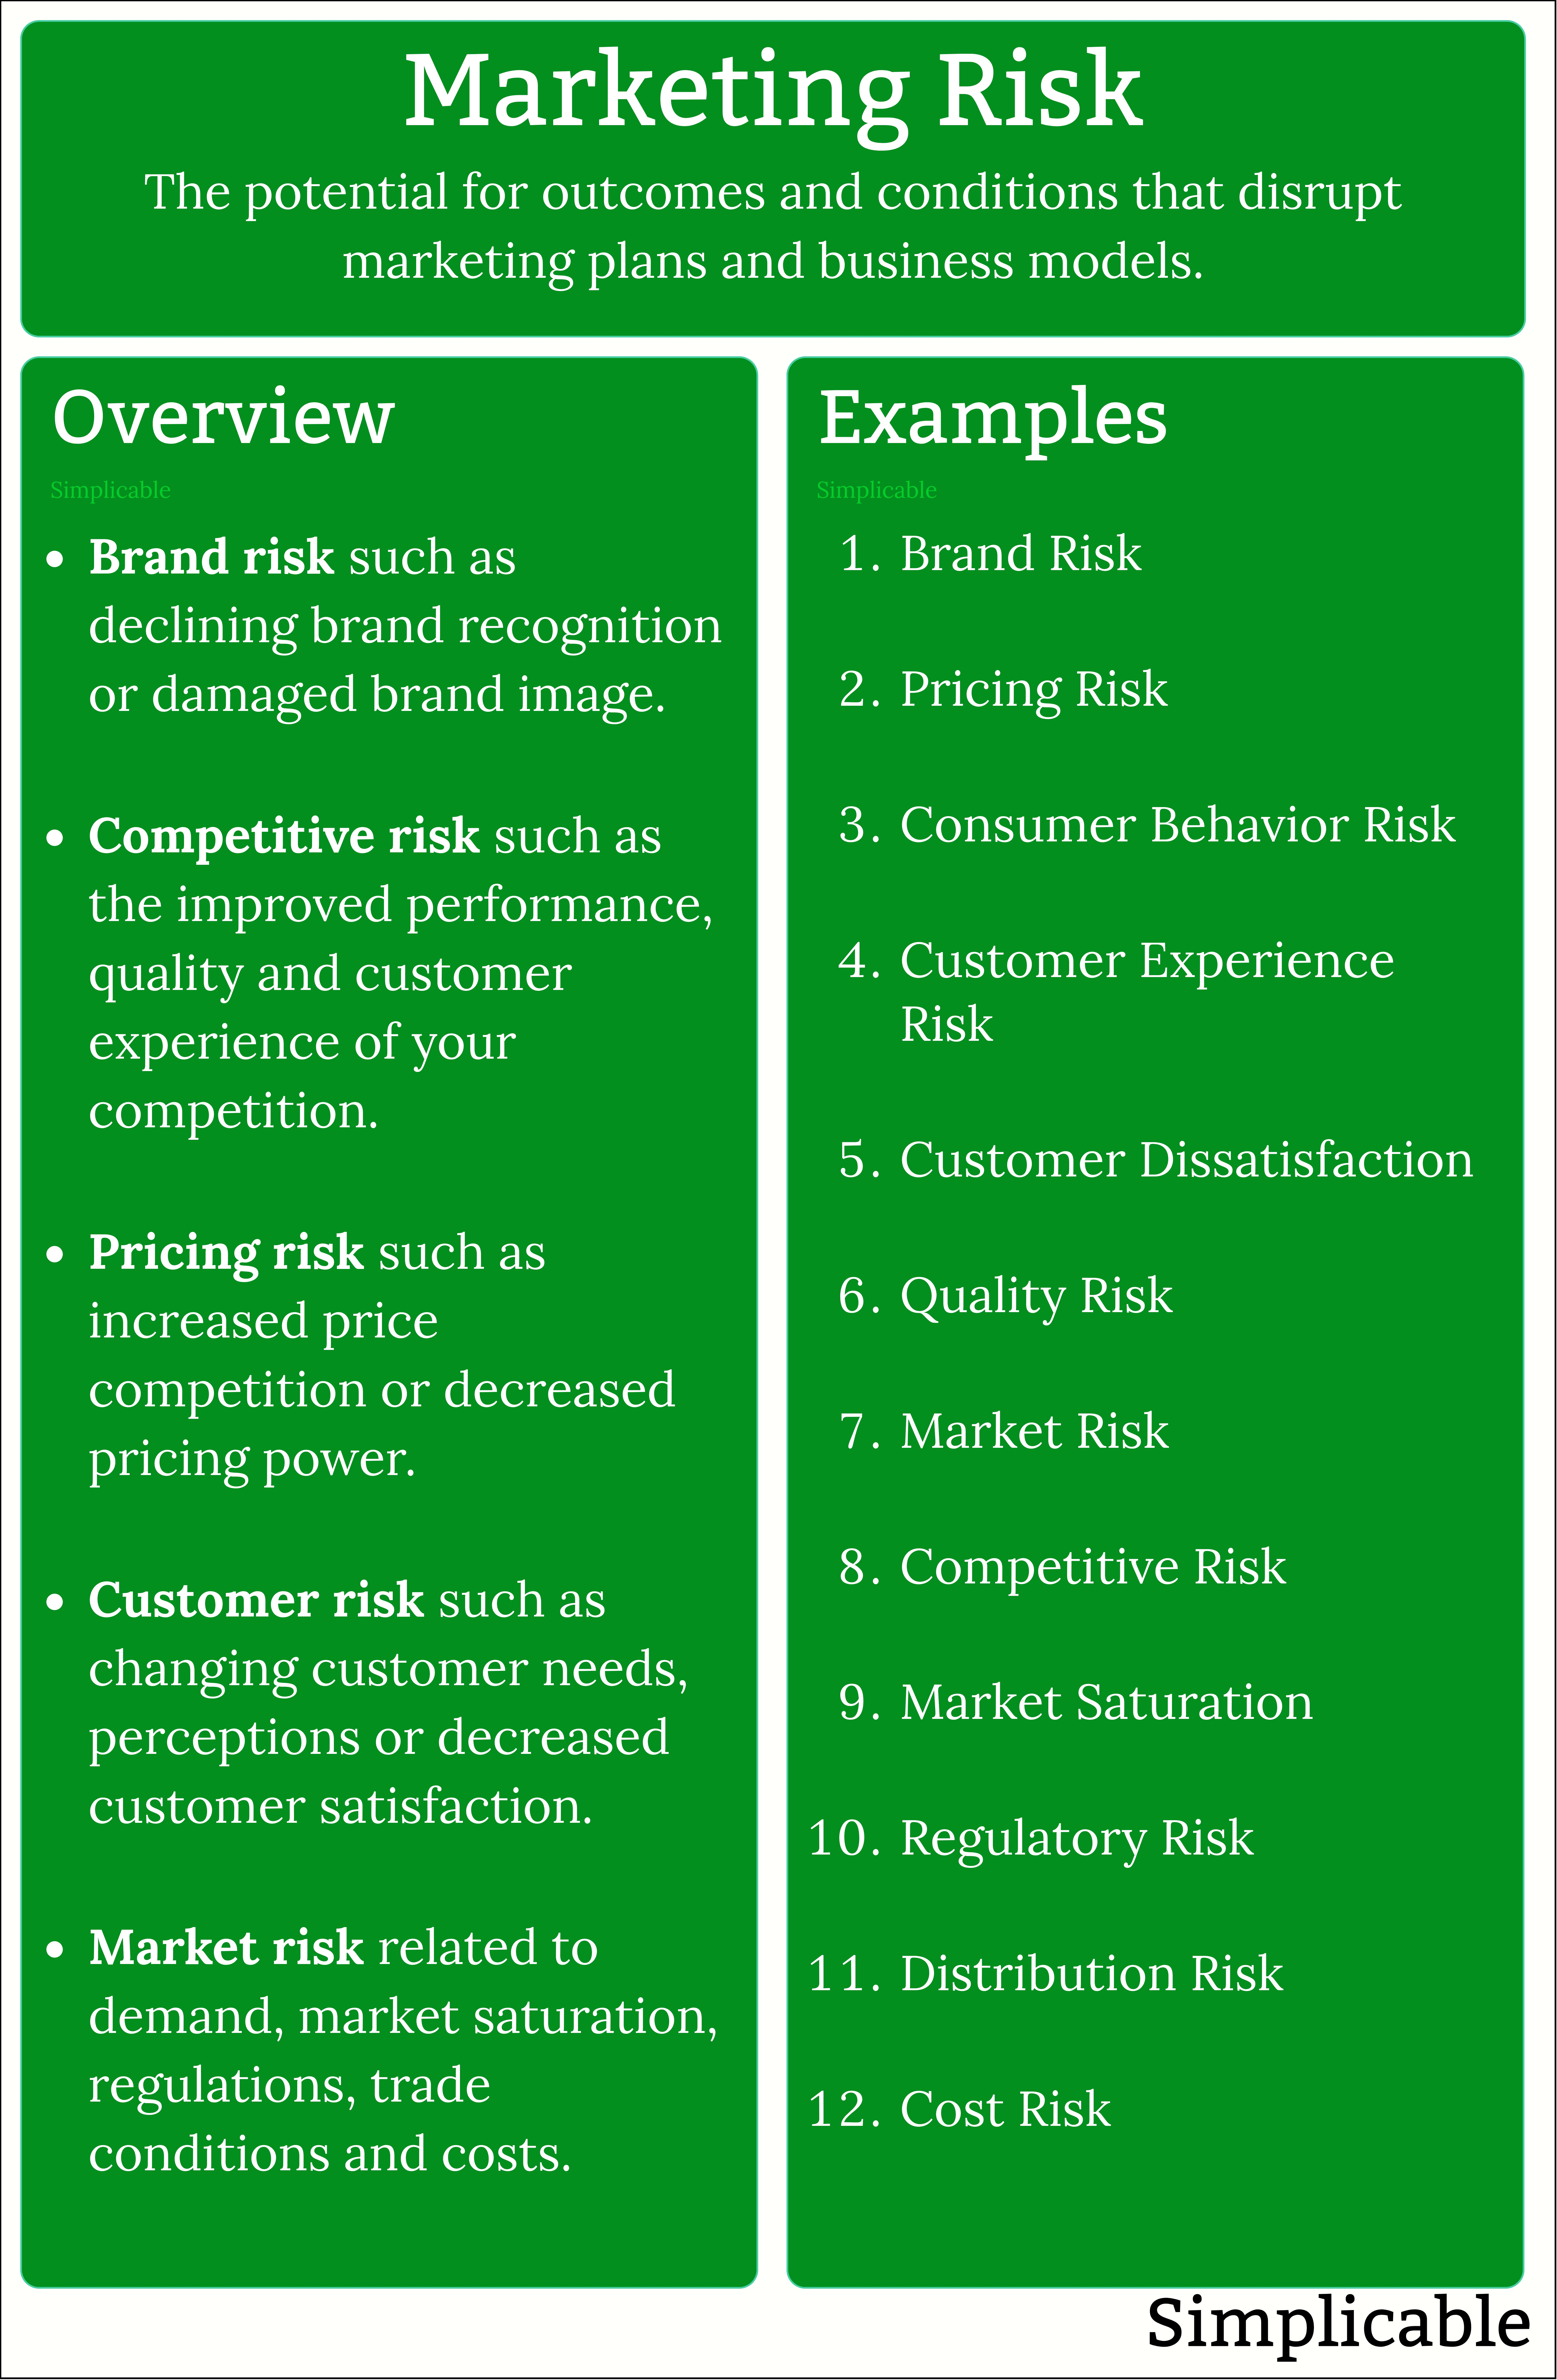 marketing risk overview and examples